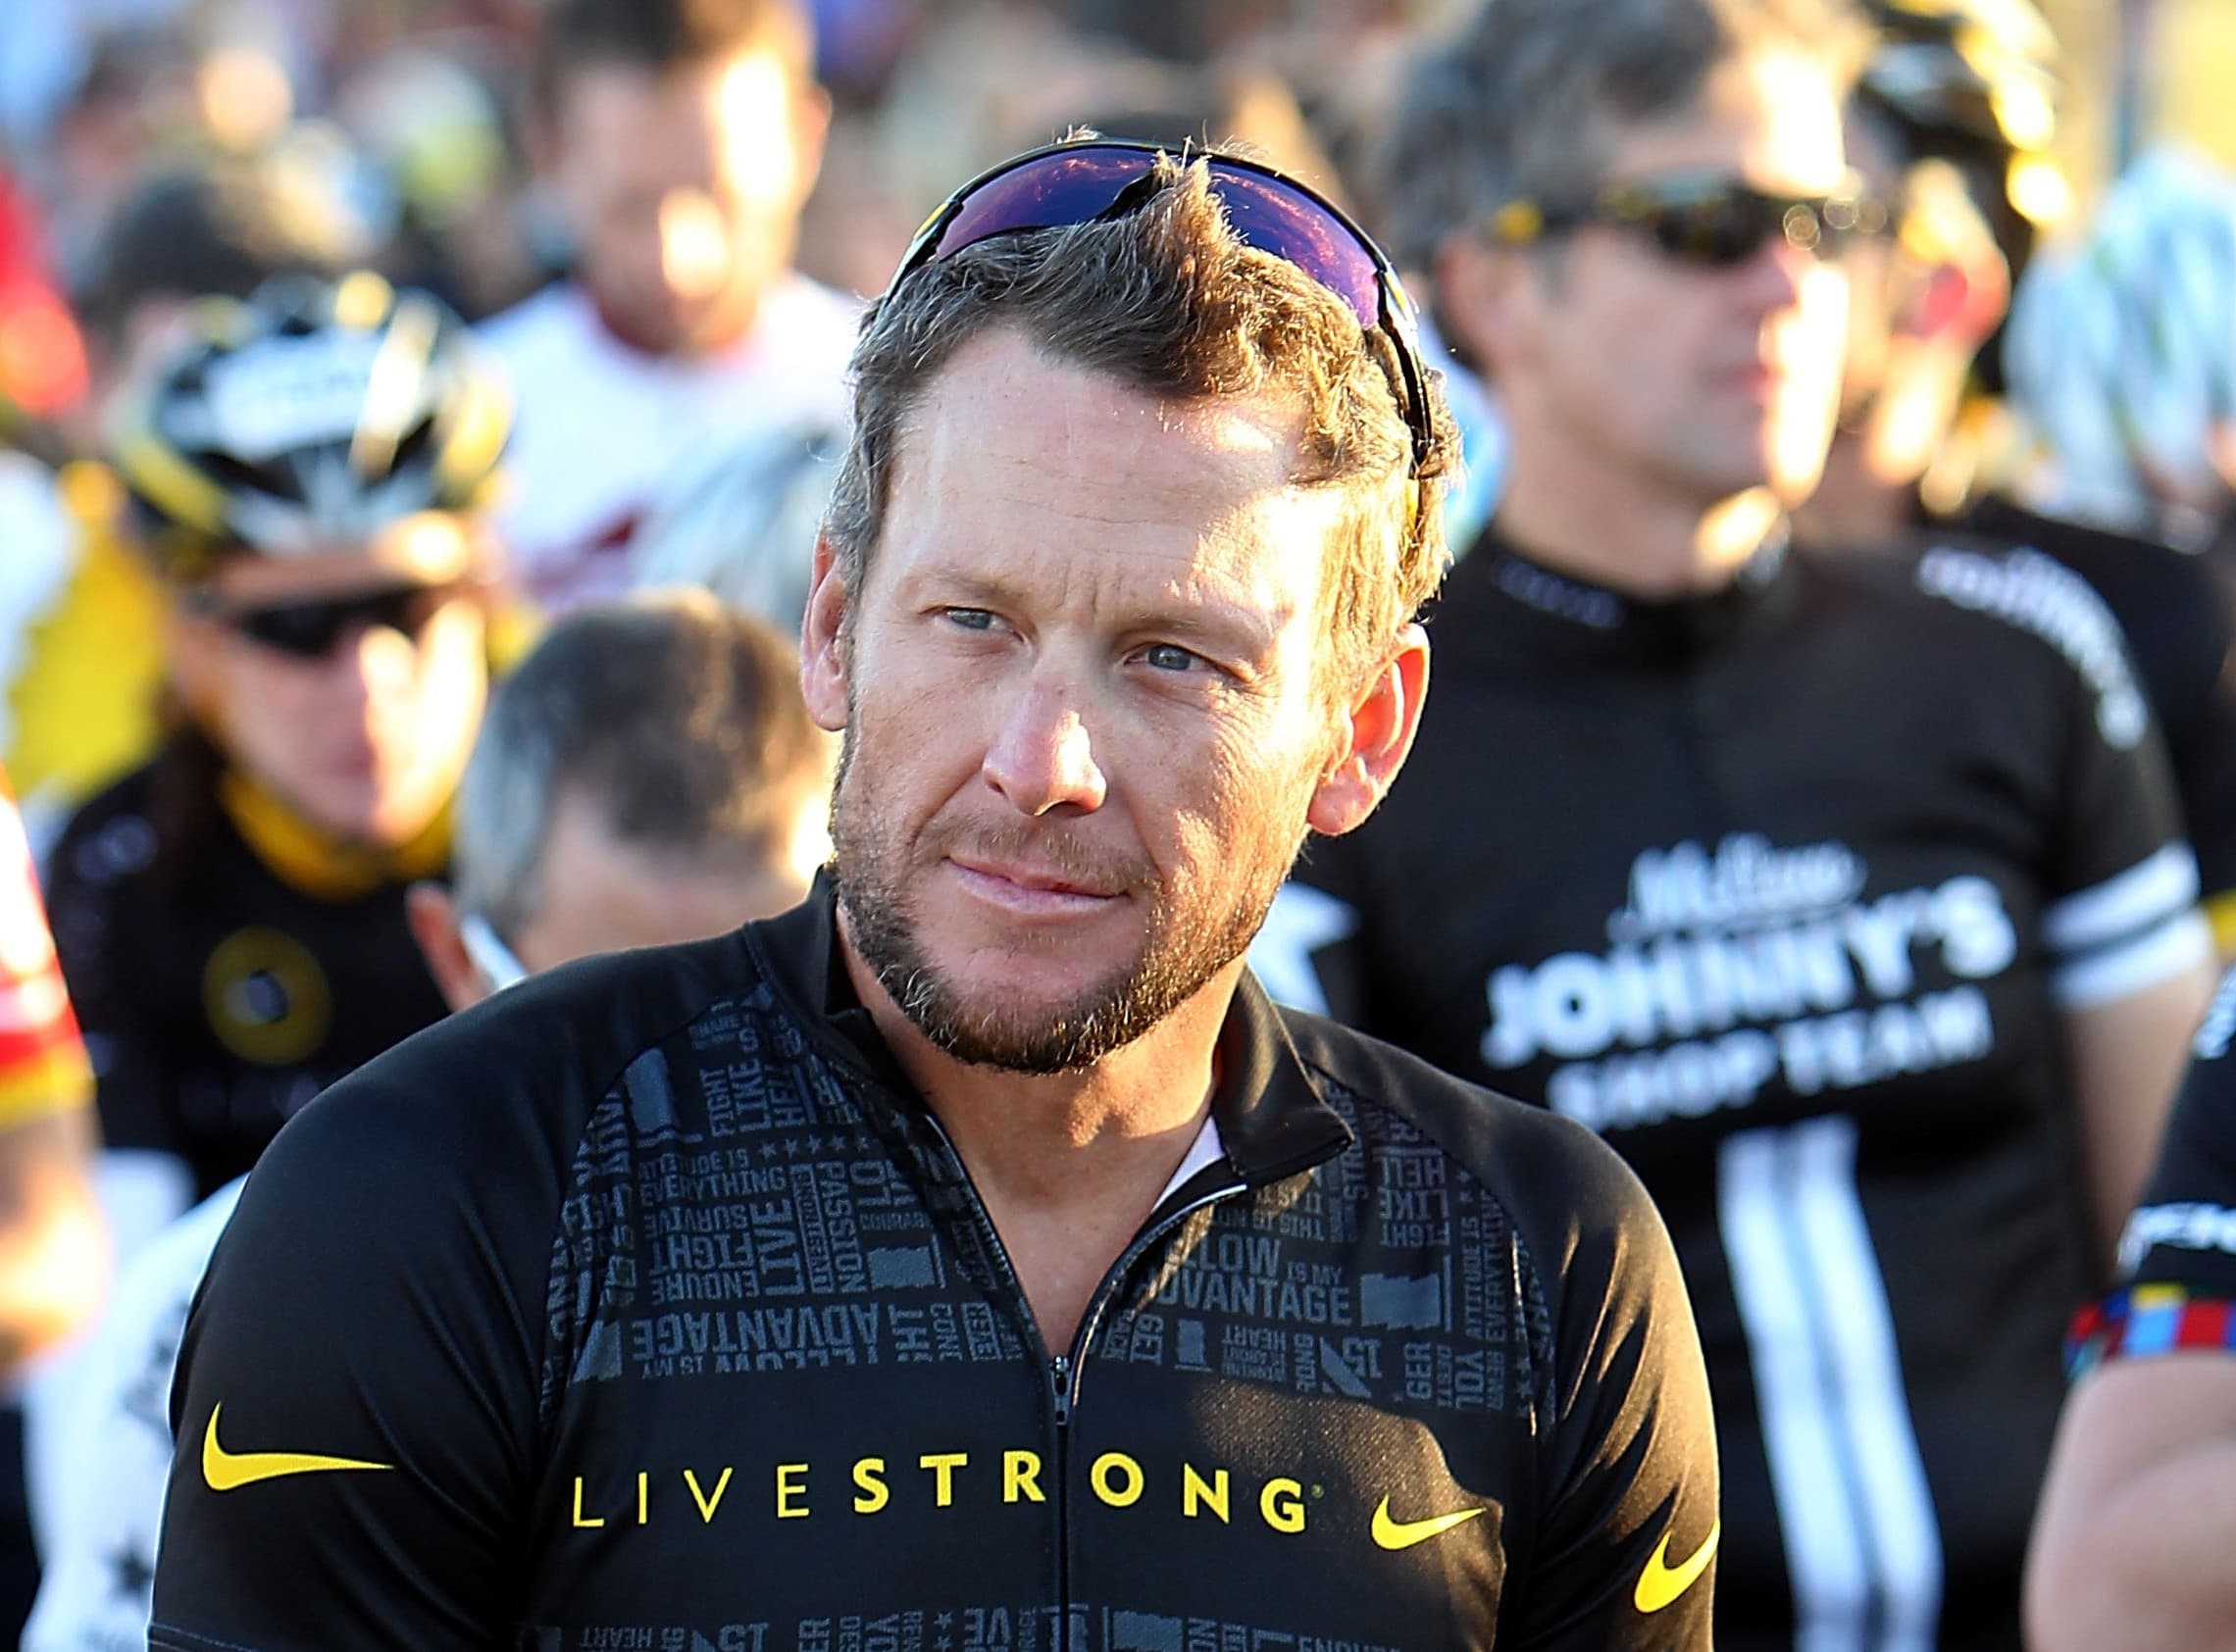 Armstrong loses sponsors, Sponsorship fallout, Challenging times, Moving forward, 2280x1690 HD Desktop